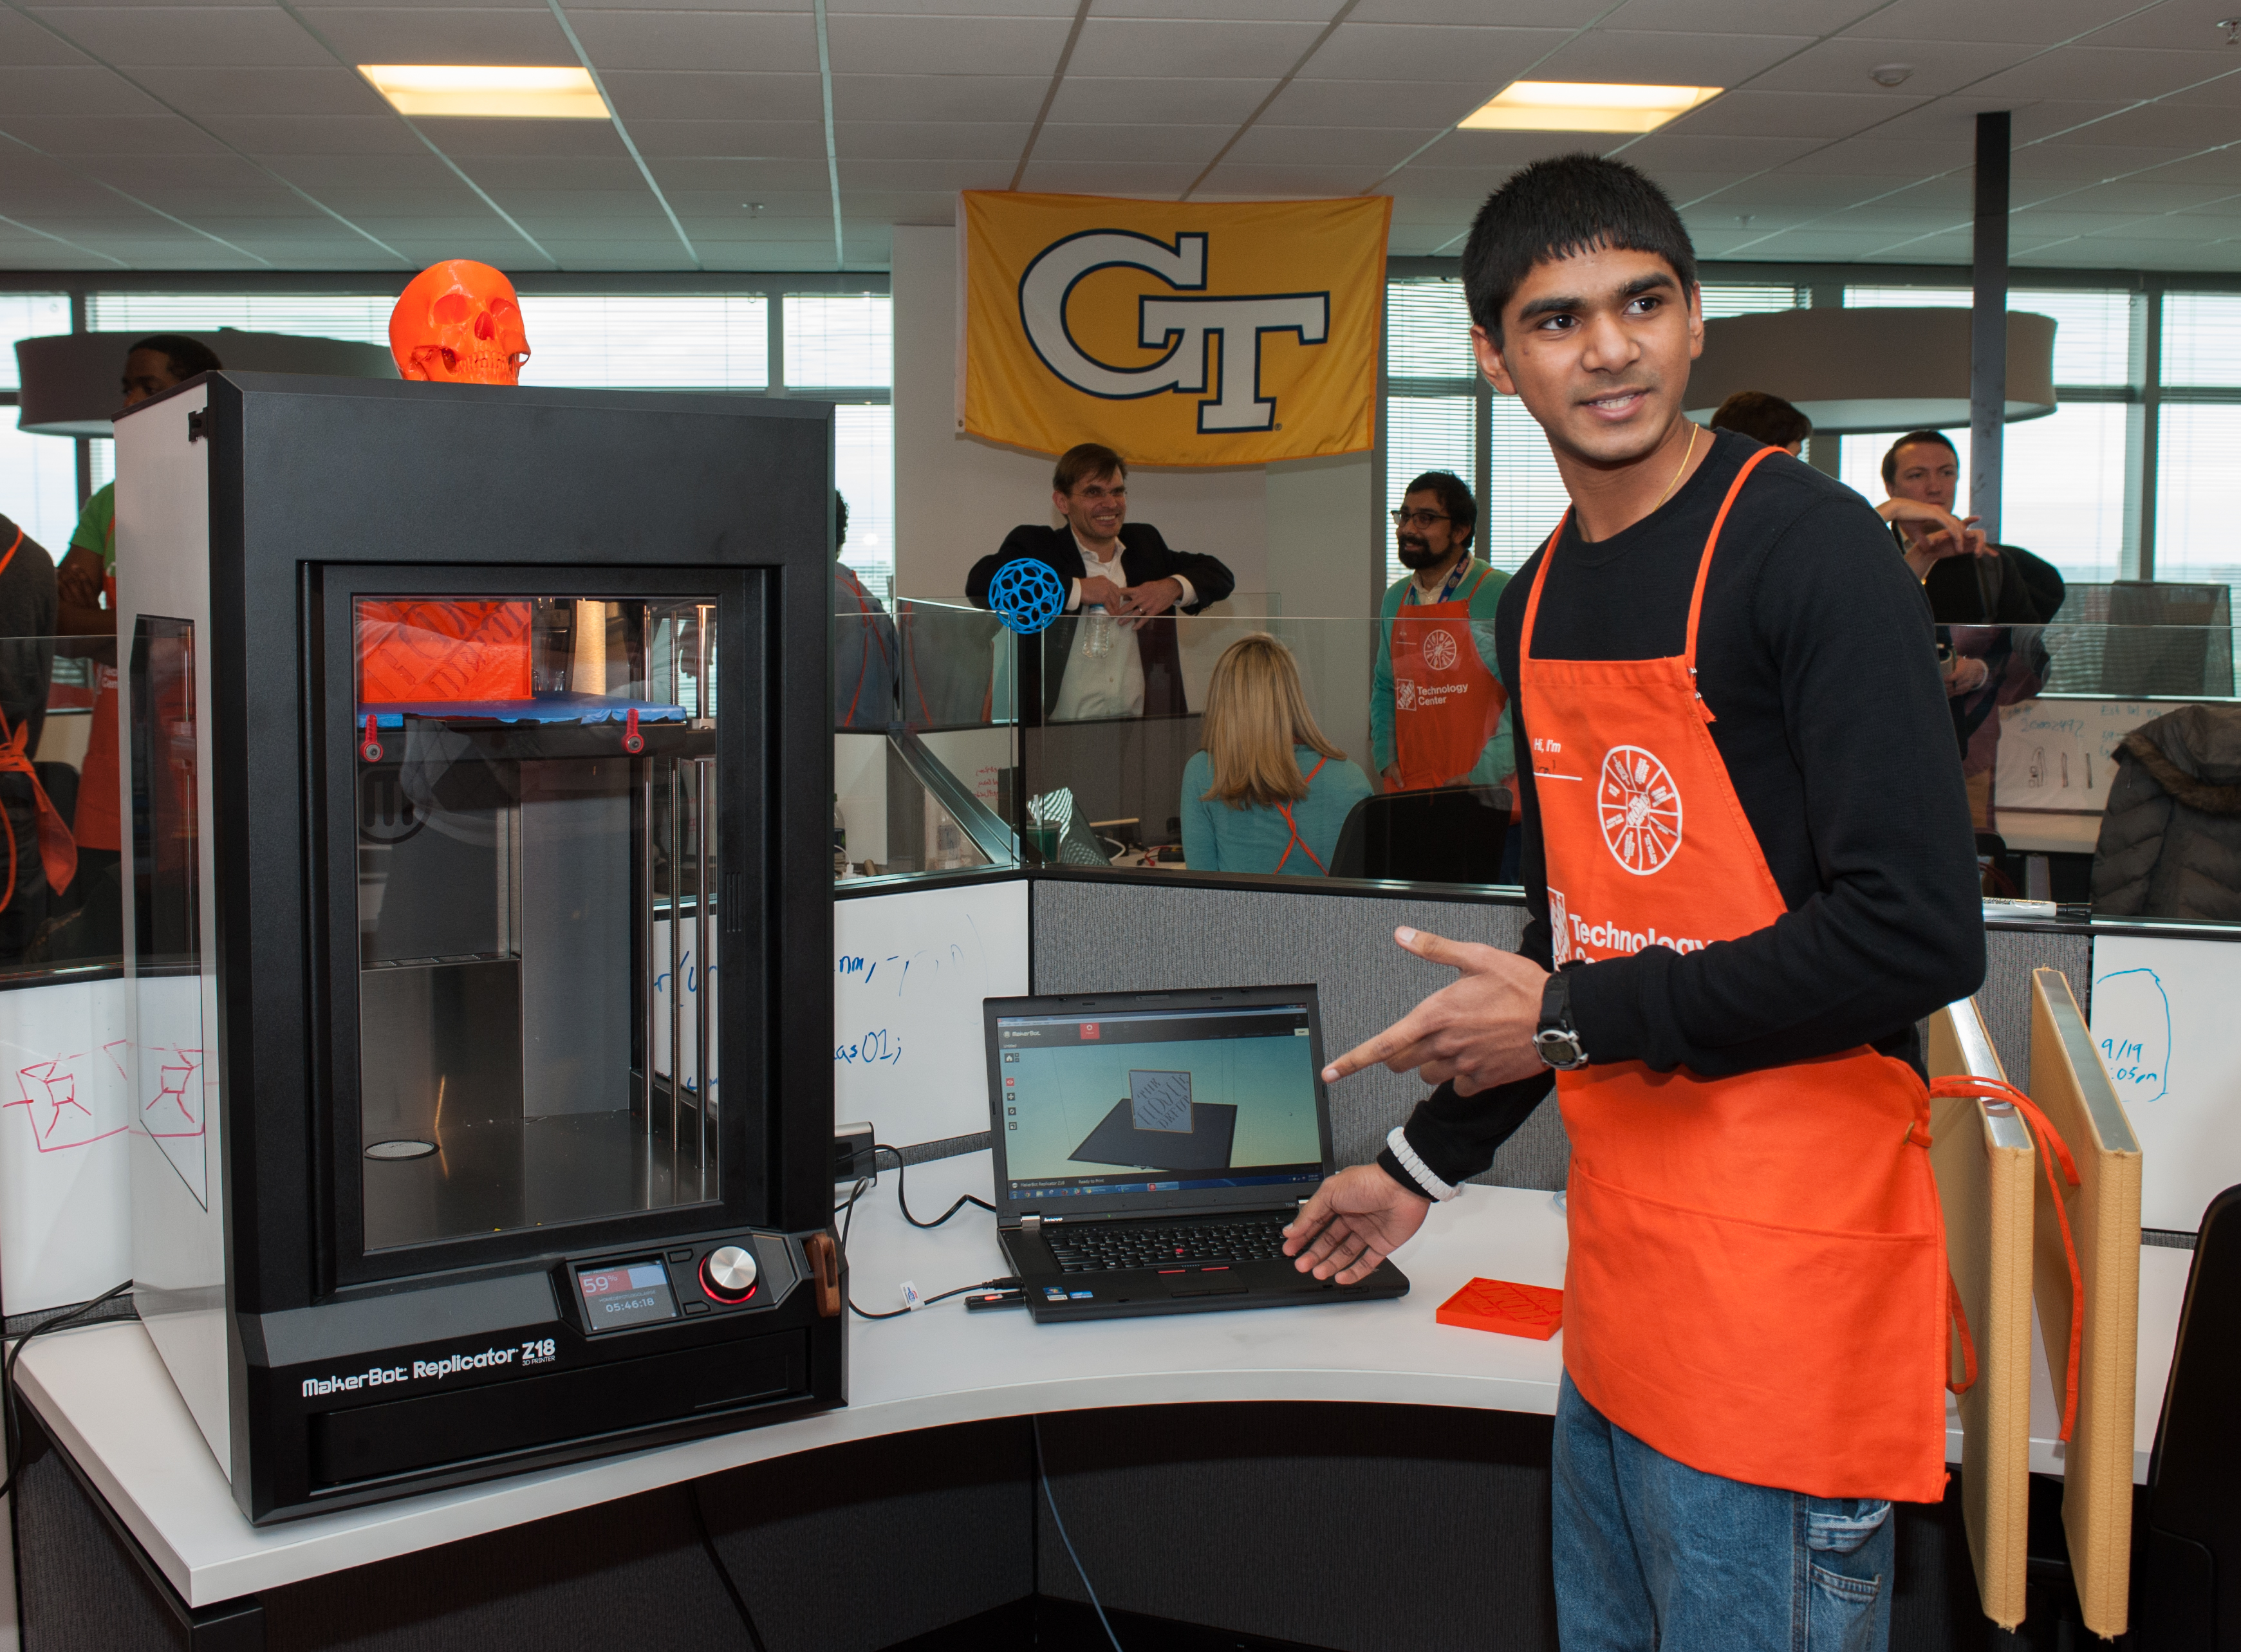 Georiga Tech student Viral Patel is one of 20 Tech students working at The Home Depot Technology Center. He works with 3D printers.